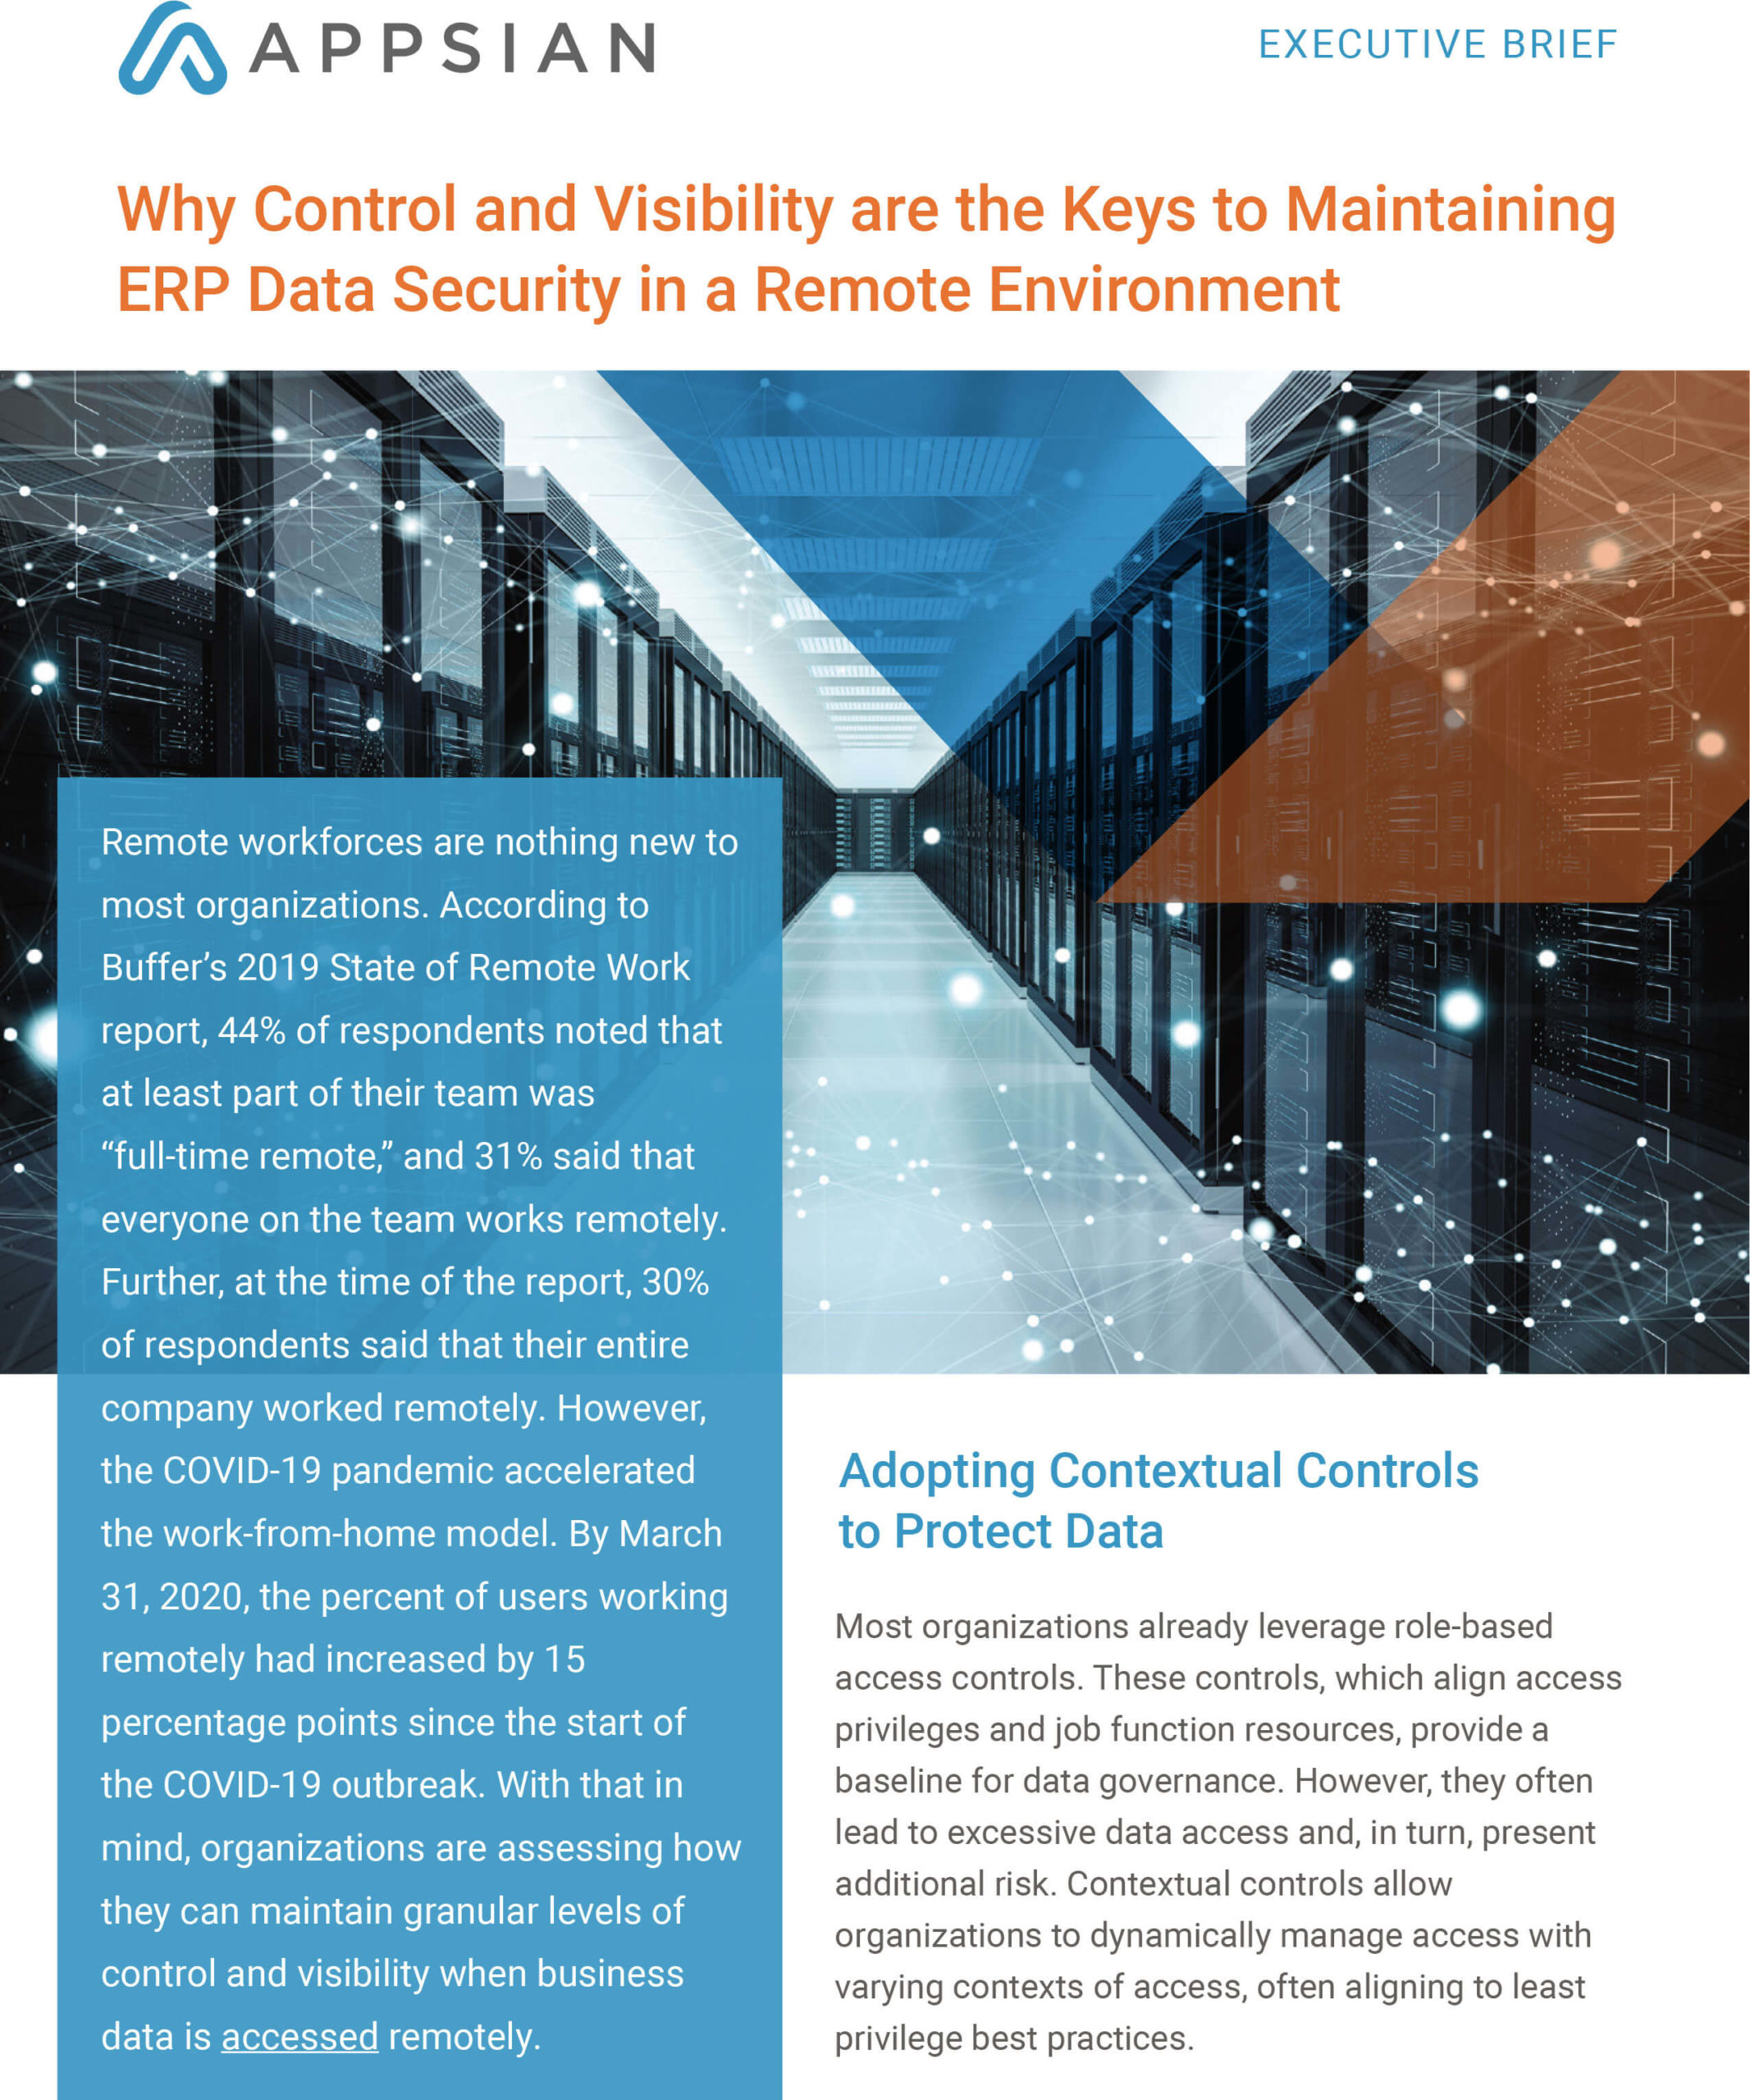 Why Control and Visibility are the Keys to Maintaining ERP Data Security in a Remote Environment